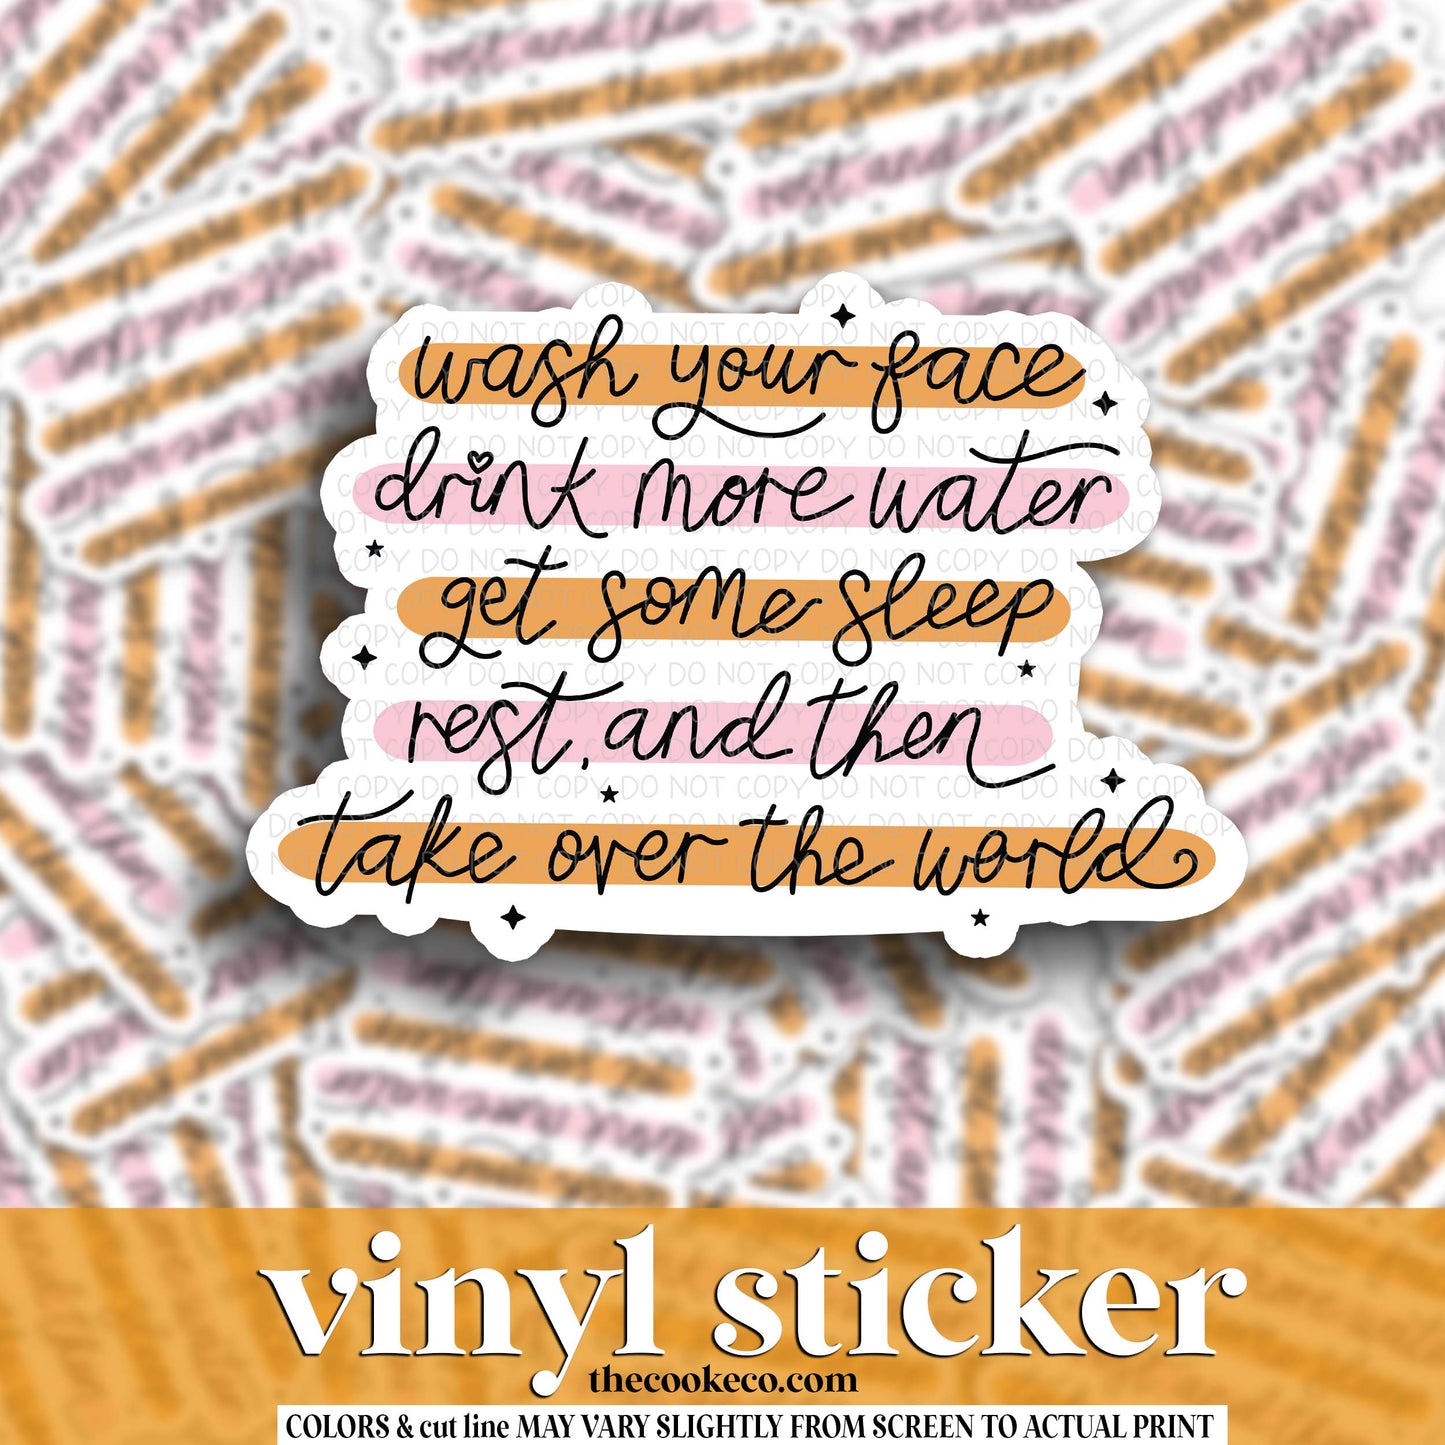 Vinyl Sticker | #V1772 - WASH YOUR FACE, DRINK MORE WATER, GET SOME SLEEP